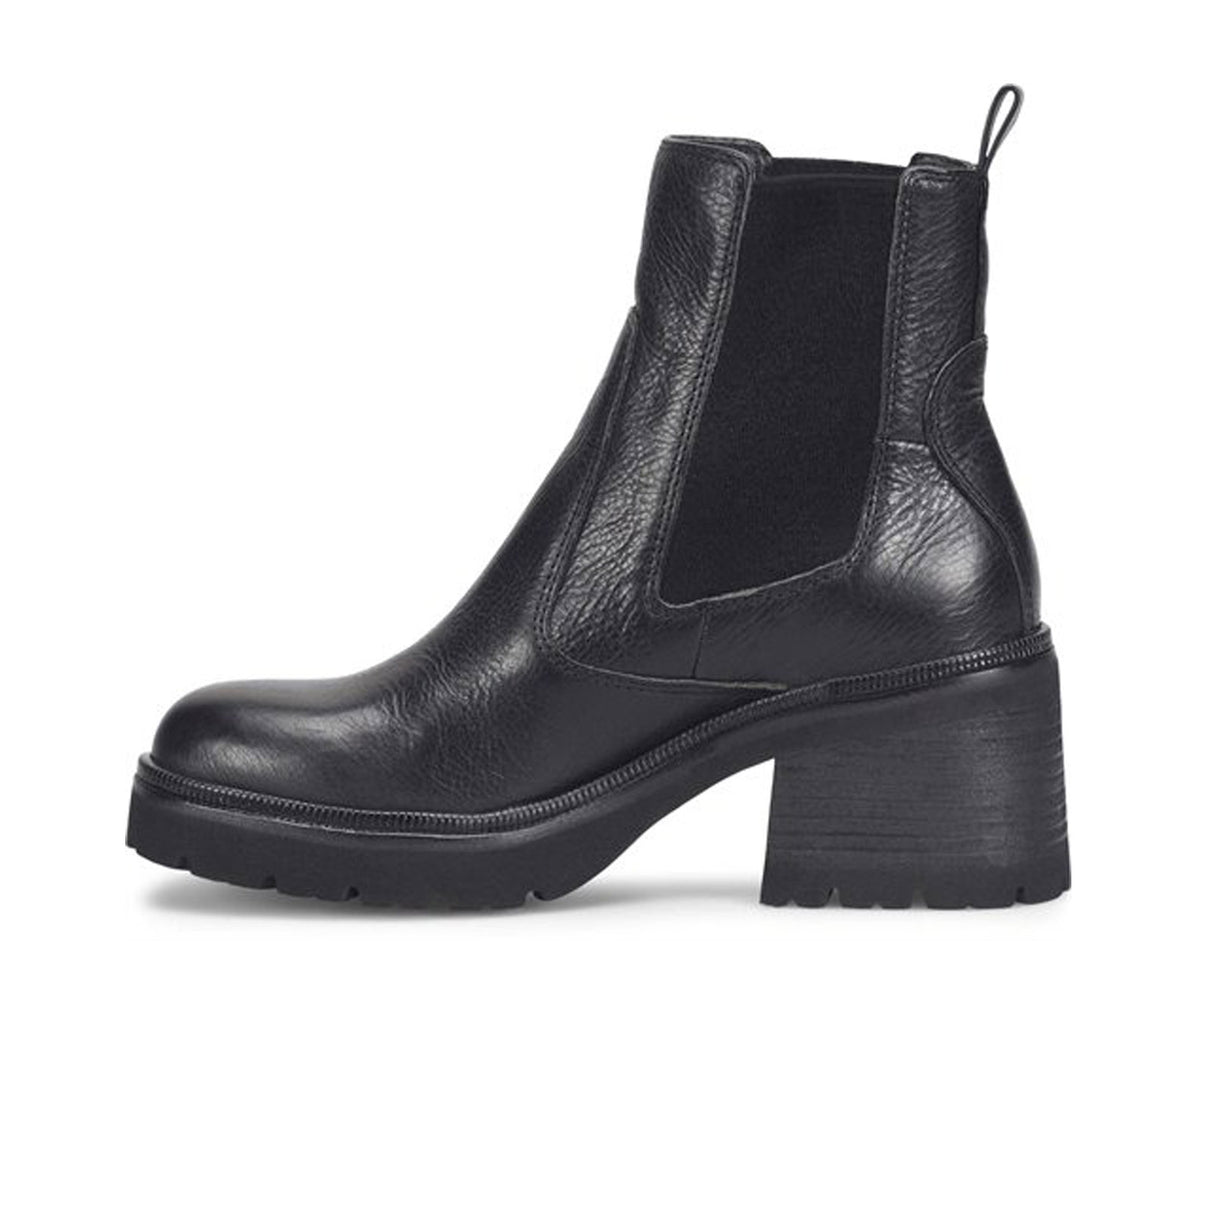 Sofft Jordie Chelsea Boot (Women) - Black Boots - Fashion - Chelsea Boot - The Heel Shoe Fitters